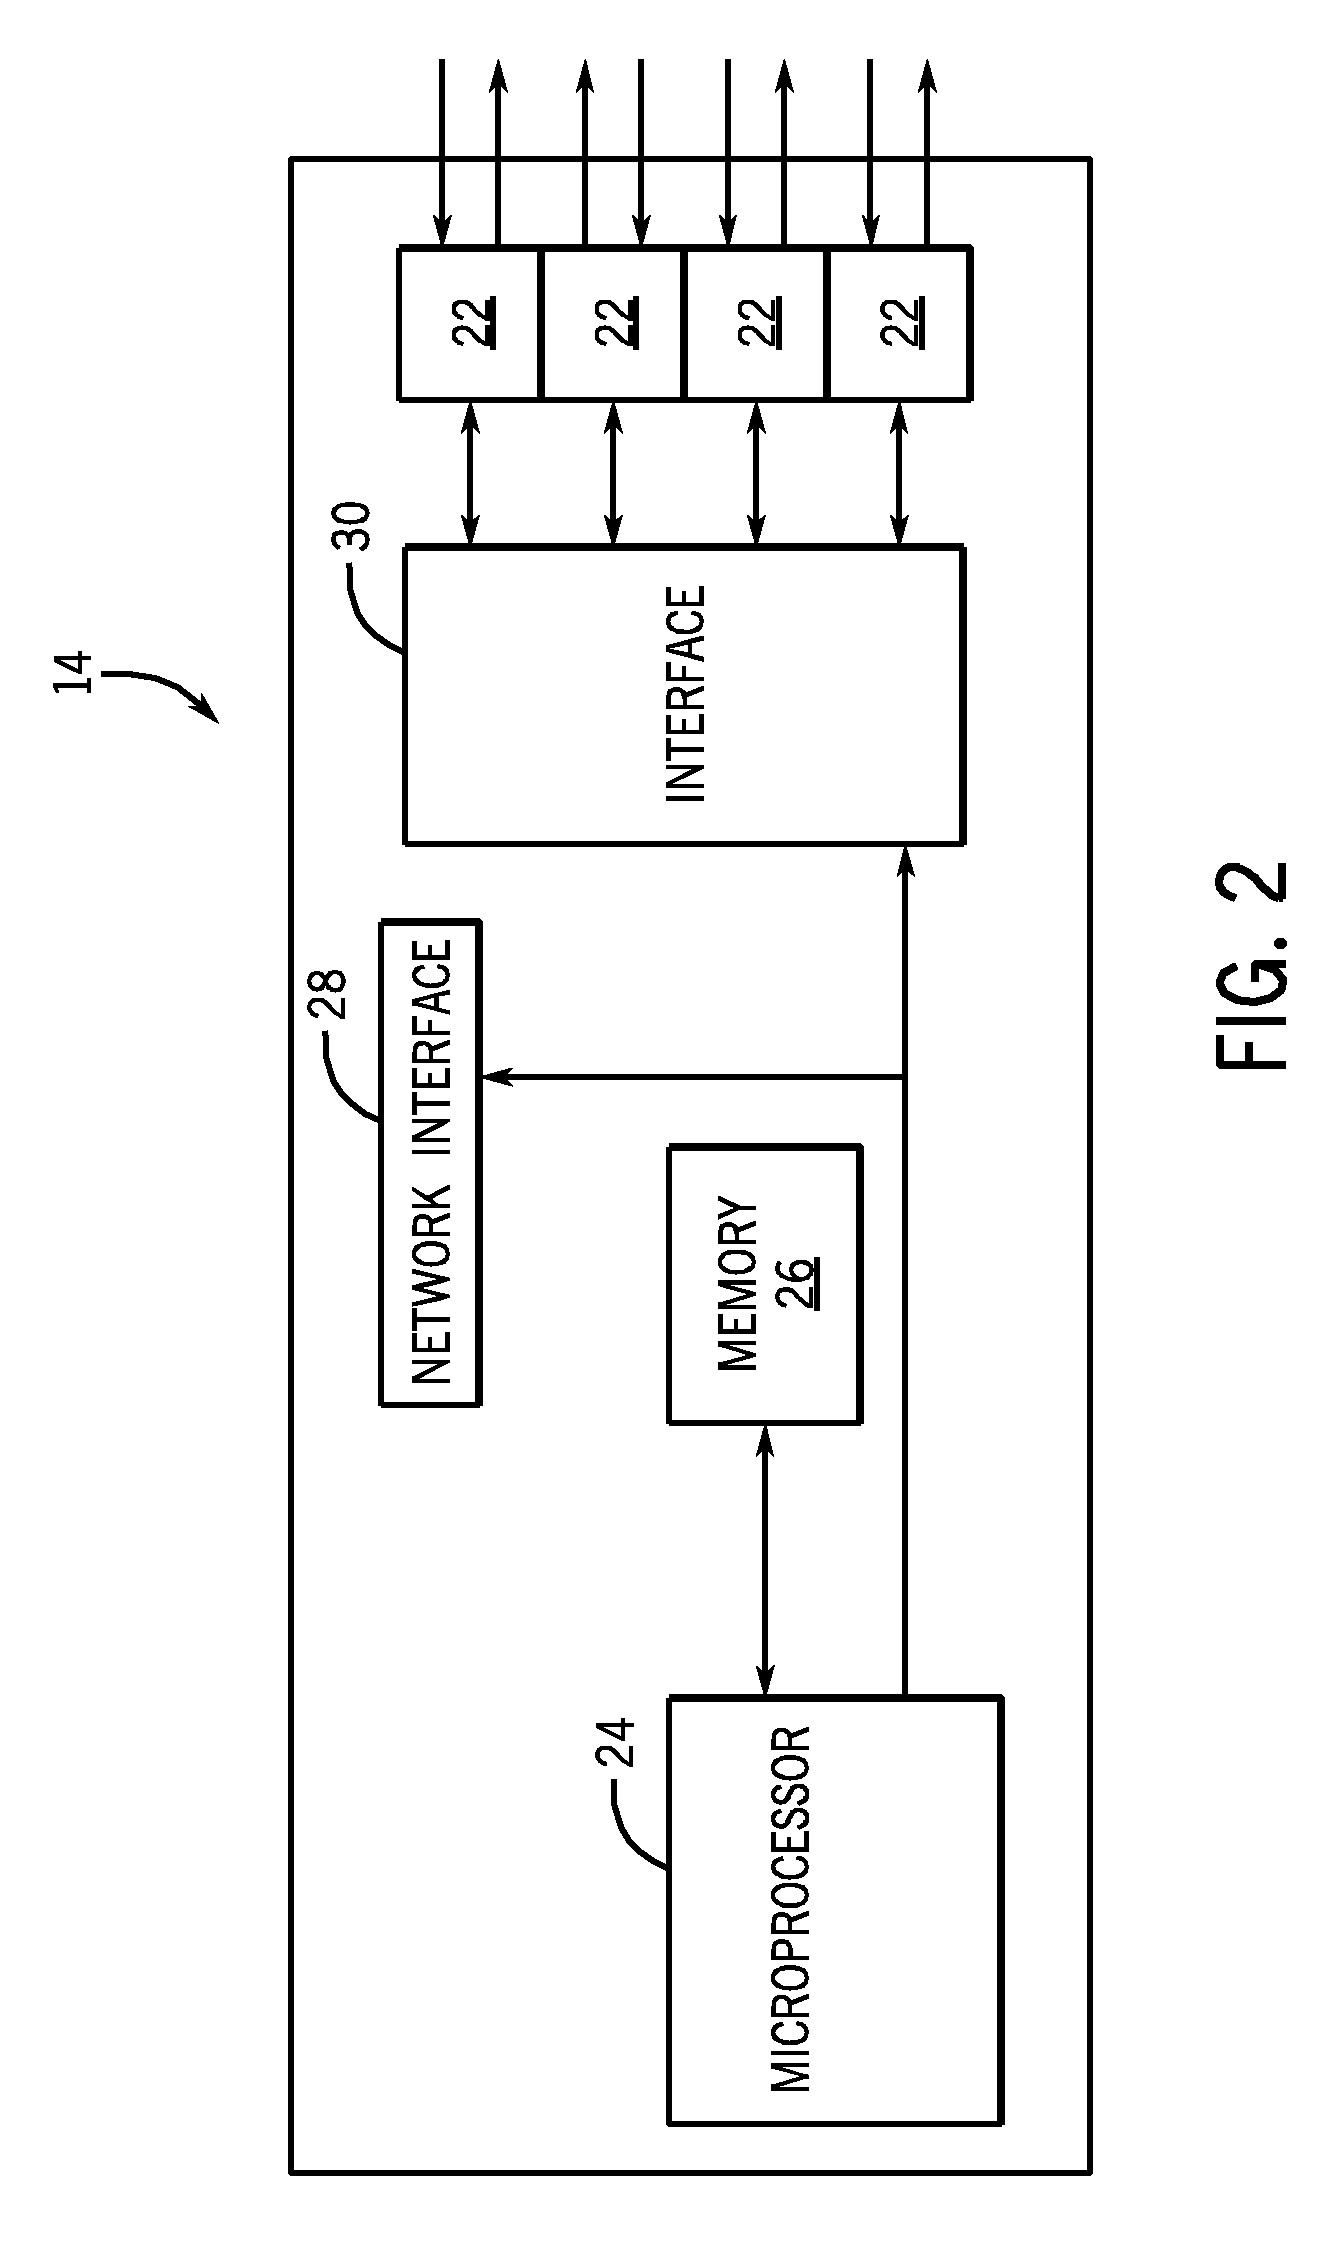 Stackable I/O modules appearing as standard USB mass storage devices